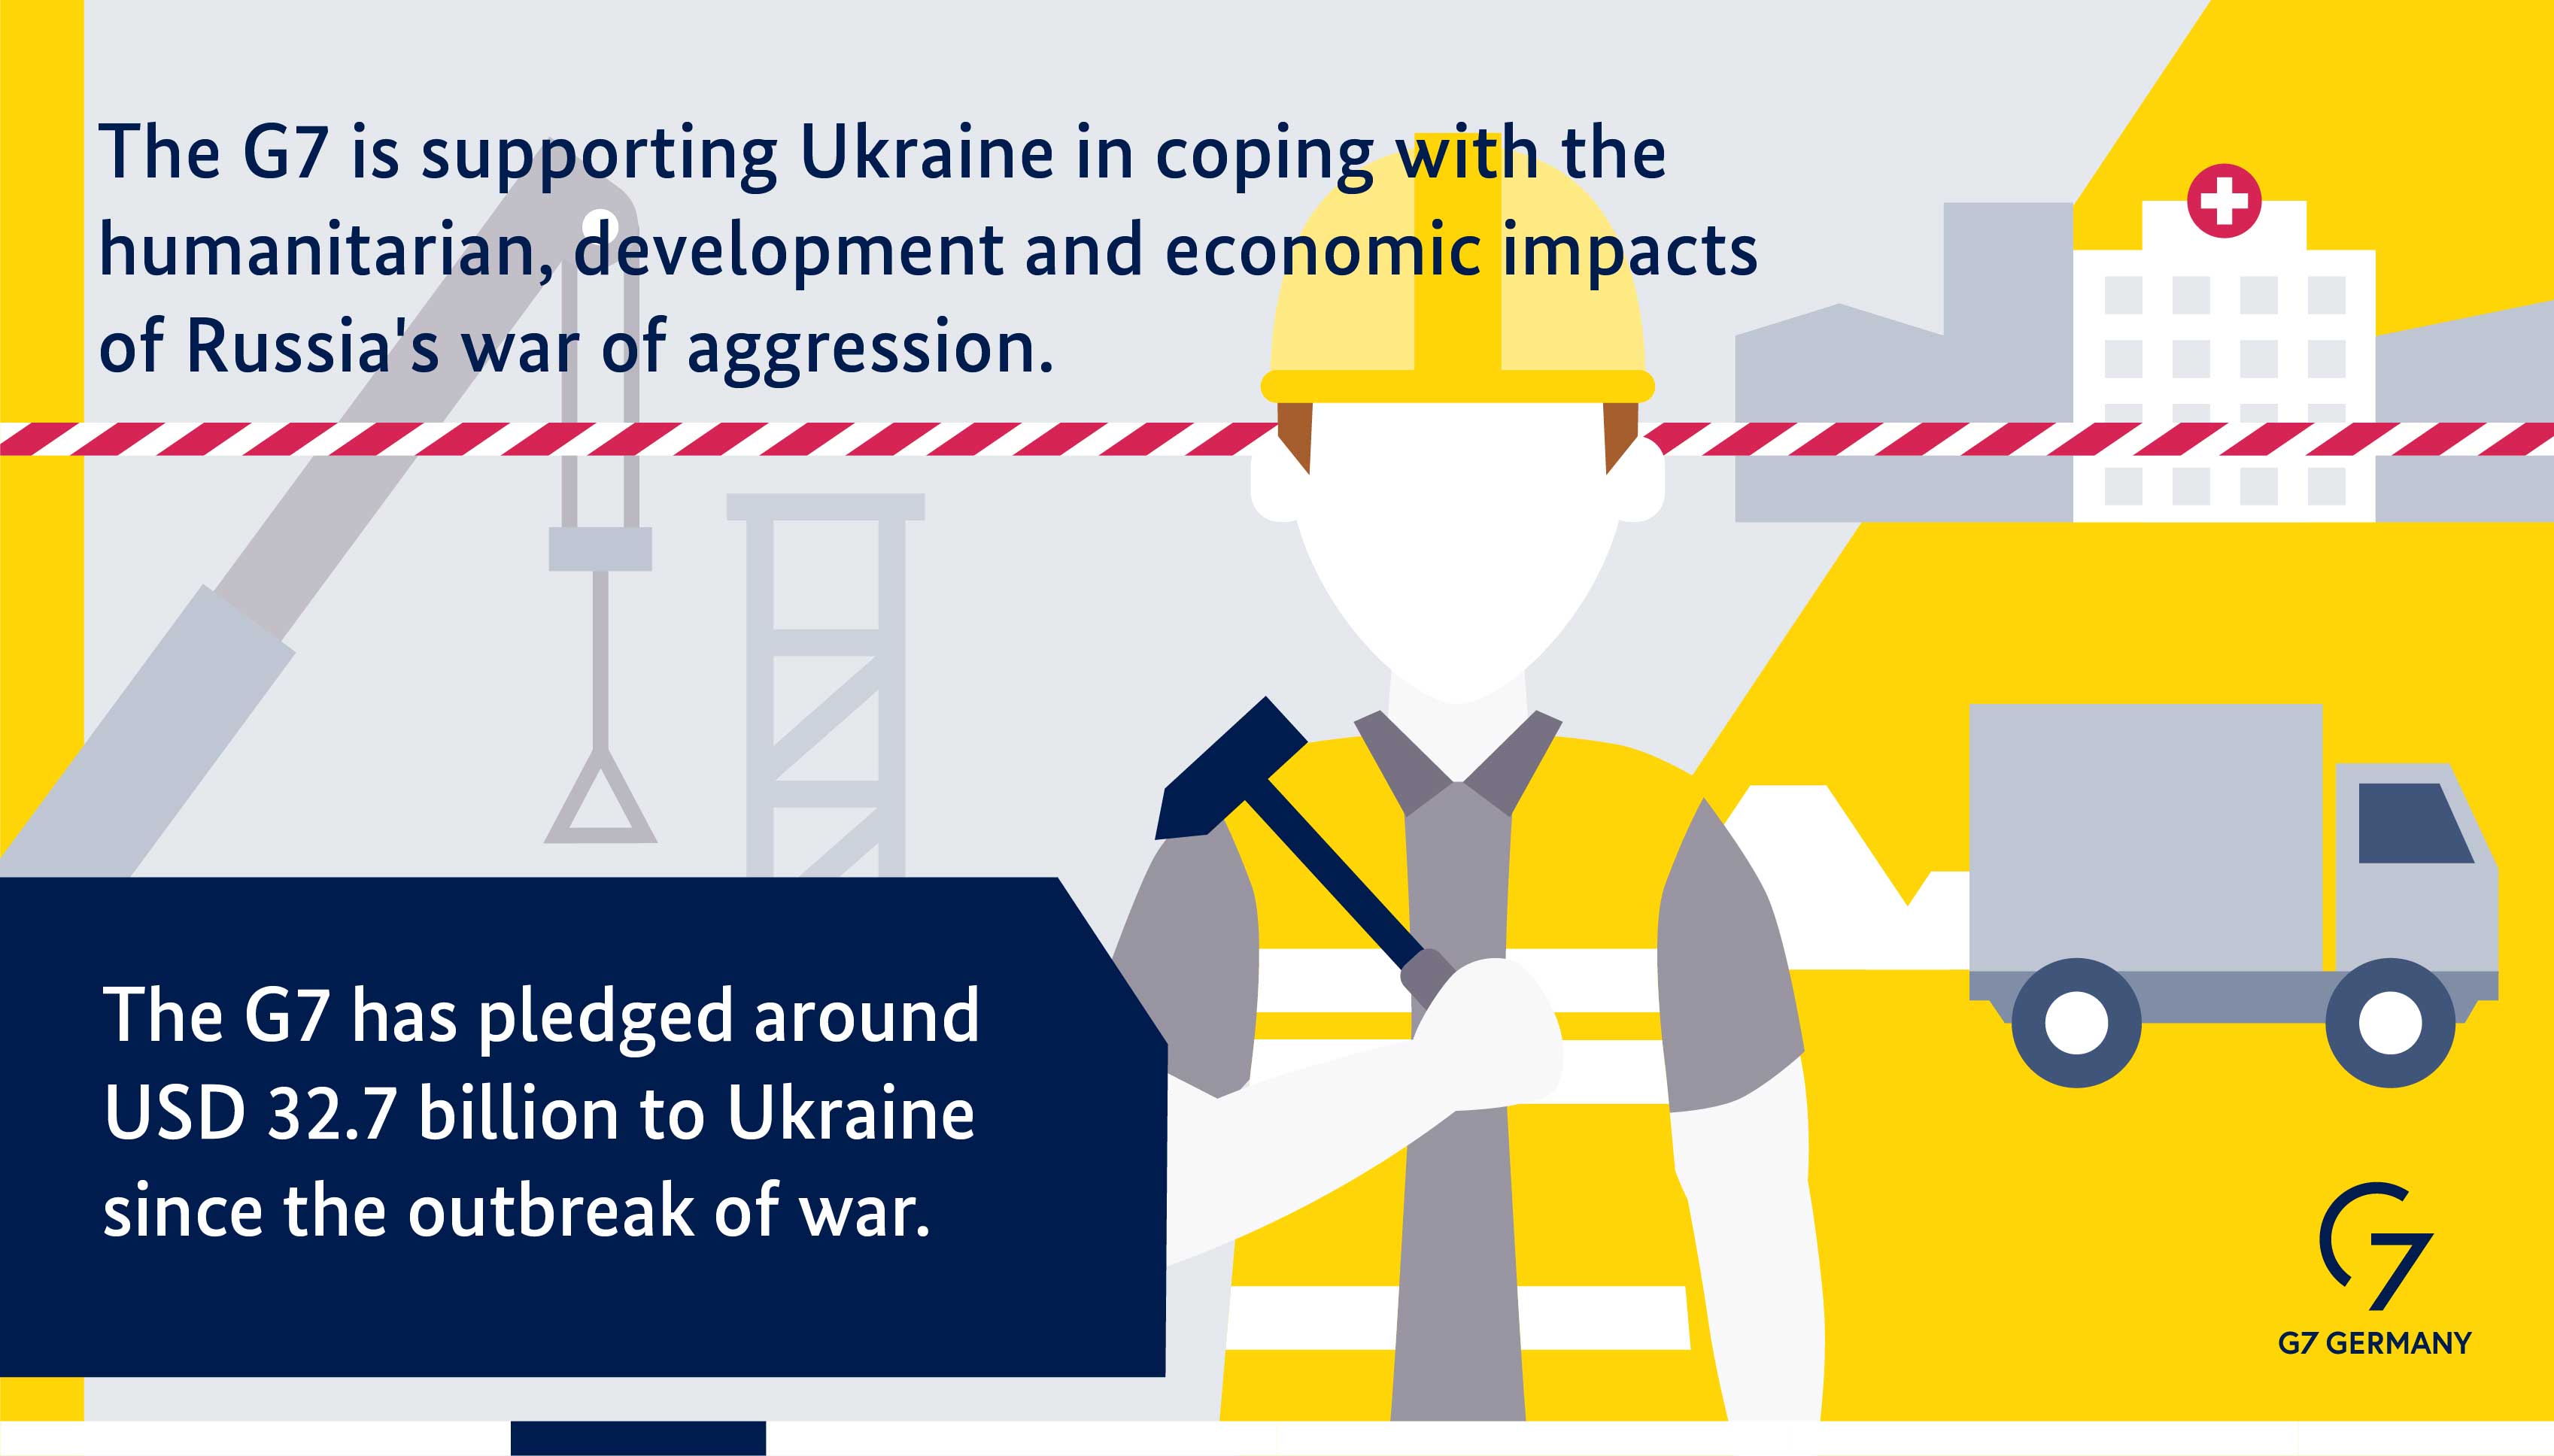 The G7 is helping Ukraine respond to humanitarian, development and economic impacts of Russia's war of aggression. The G7 has pledged around 29.5 billion US dollars to Ukraine since the war began.